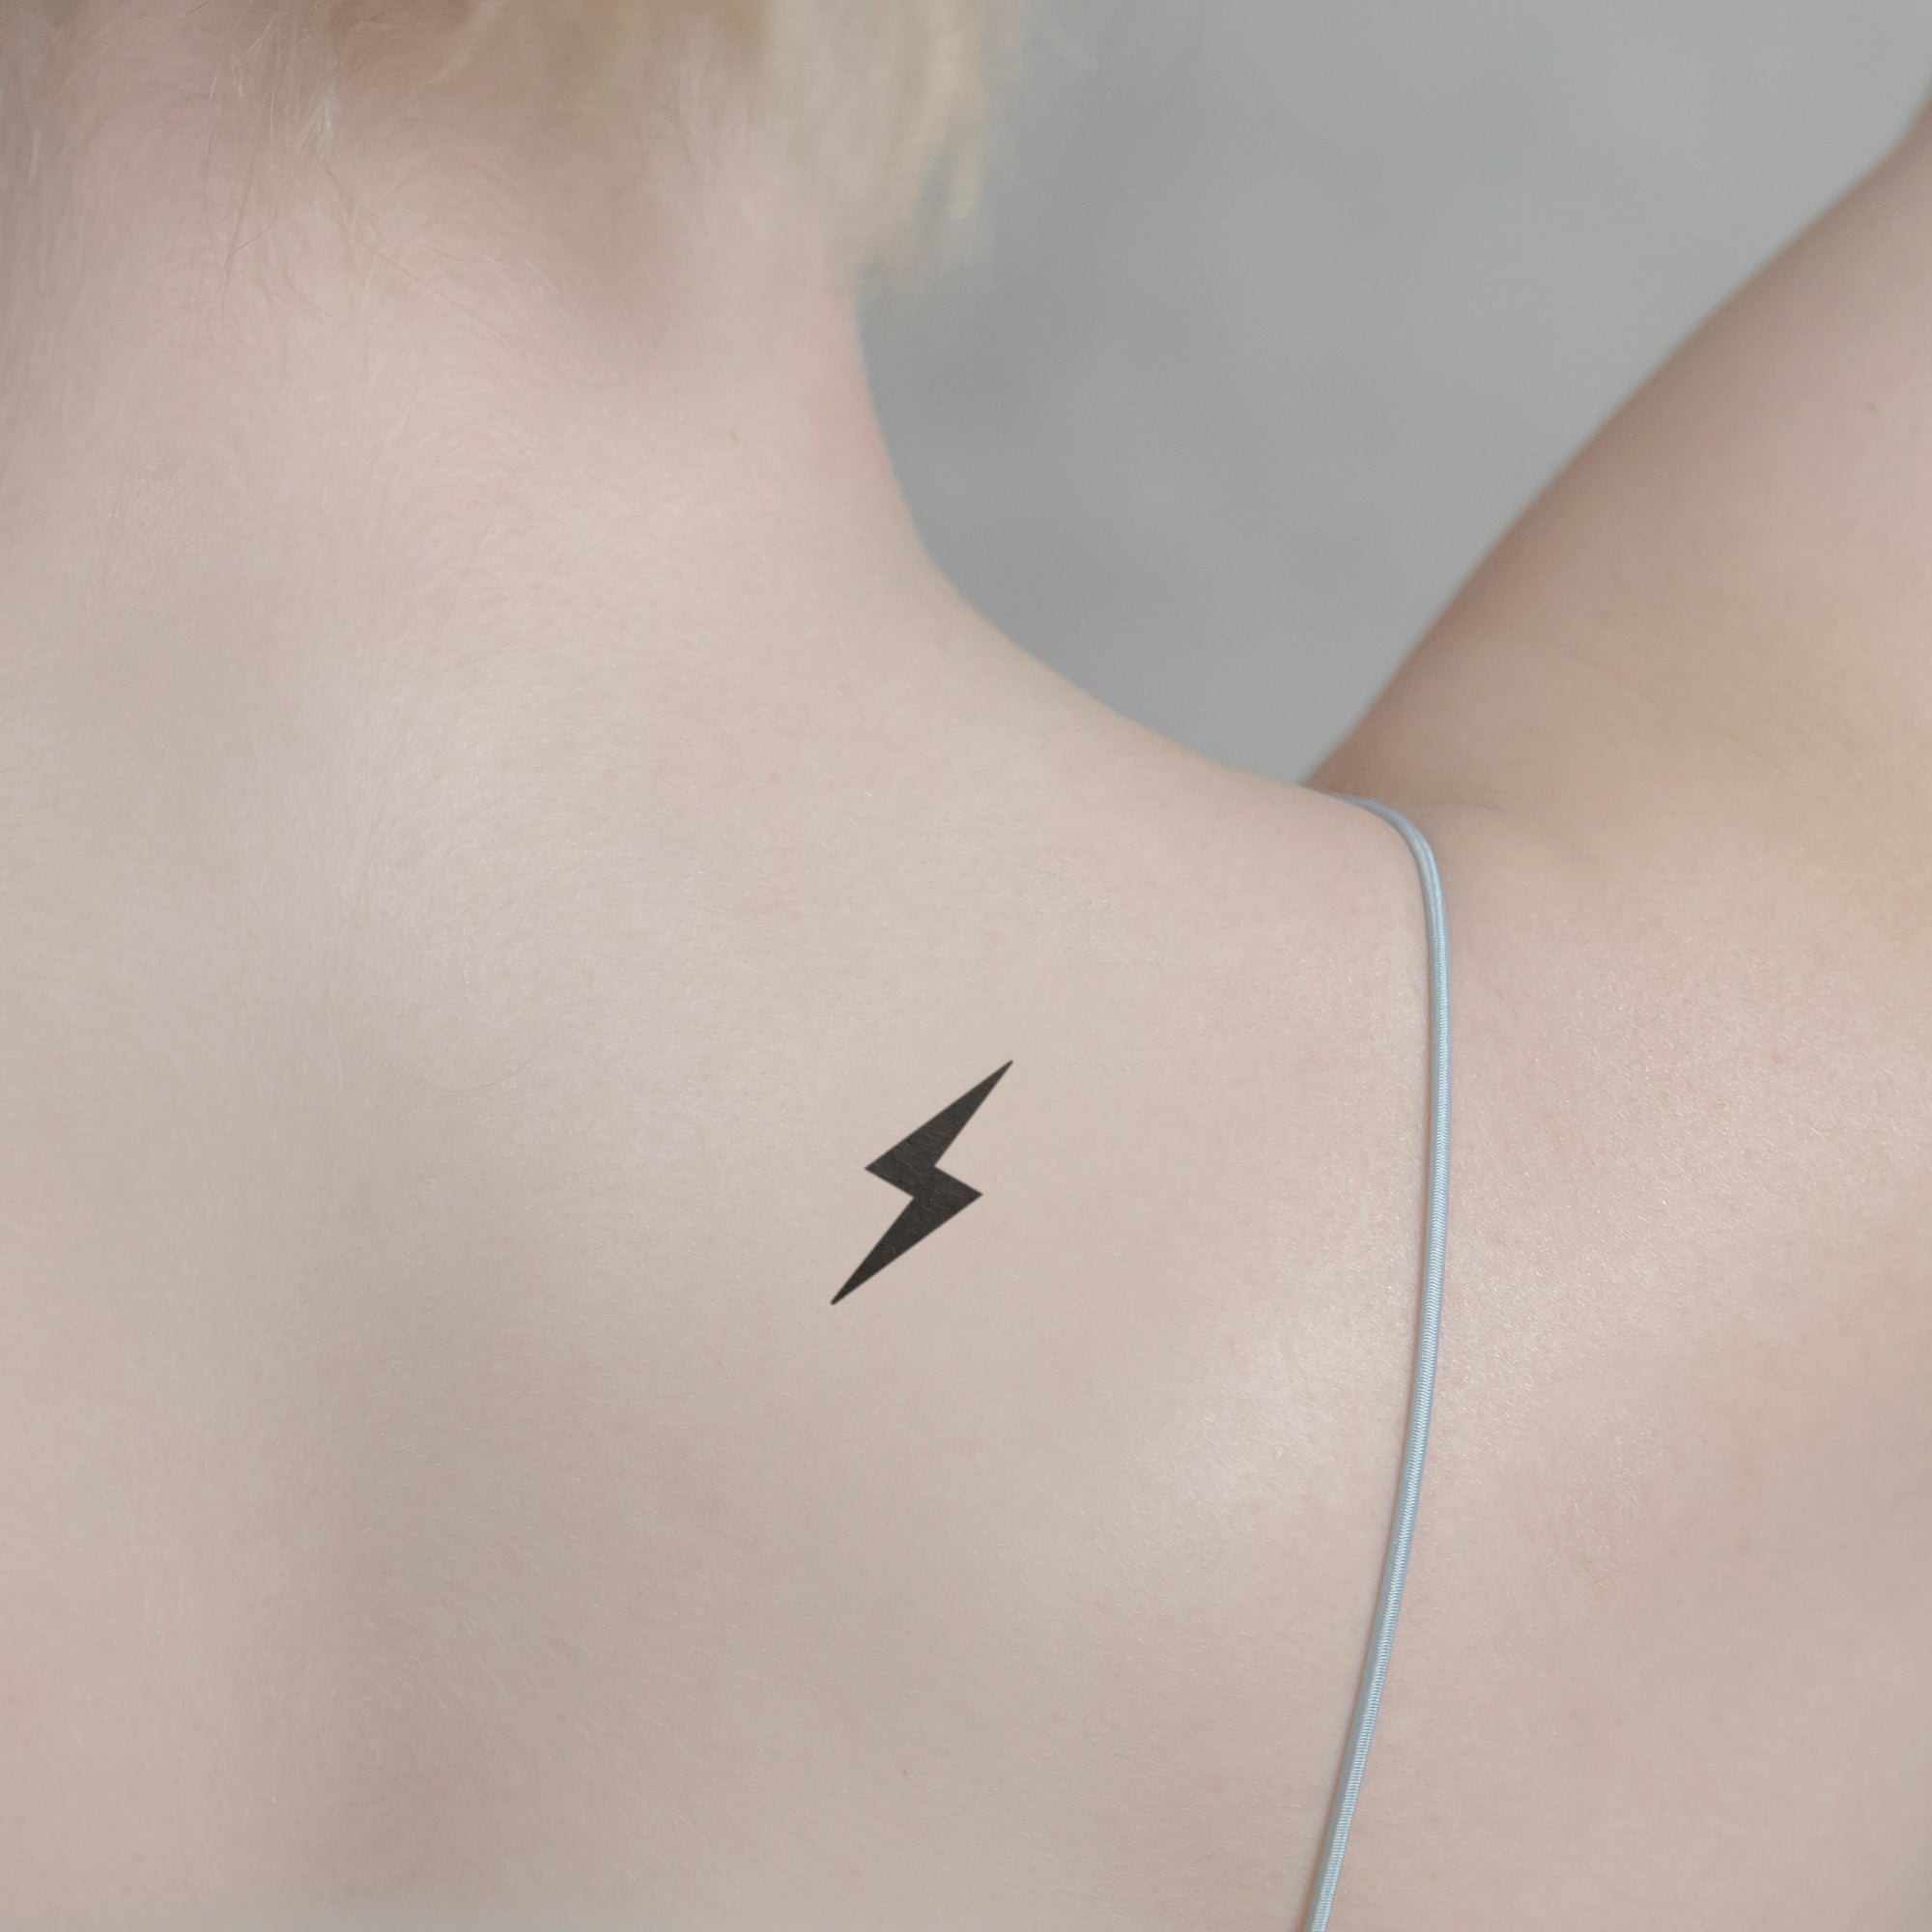 Tiny lightning bolt tattoo on the ankle.